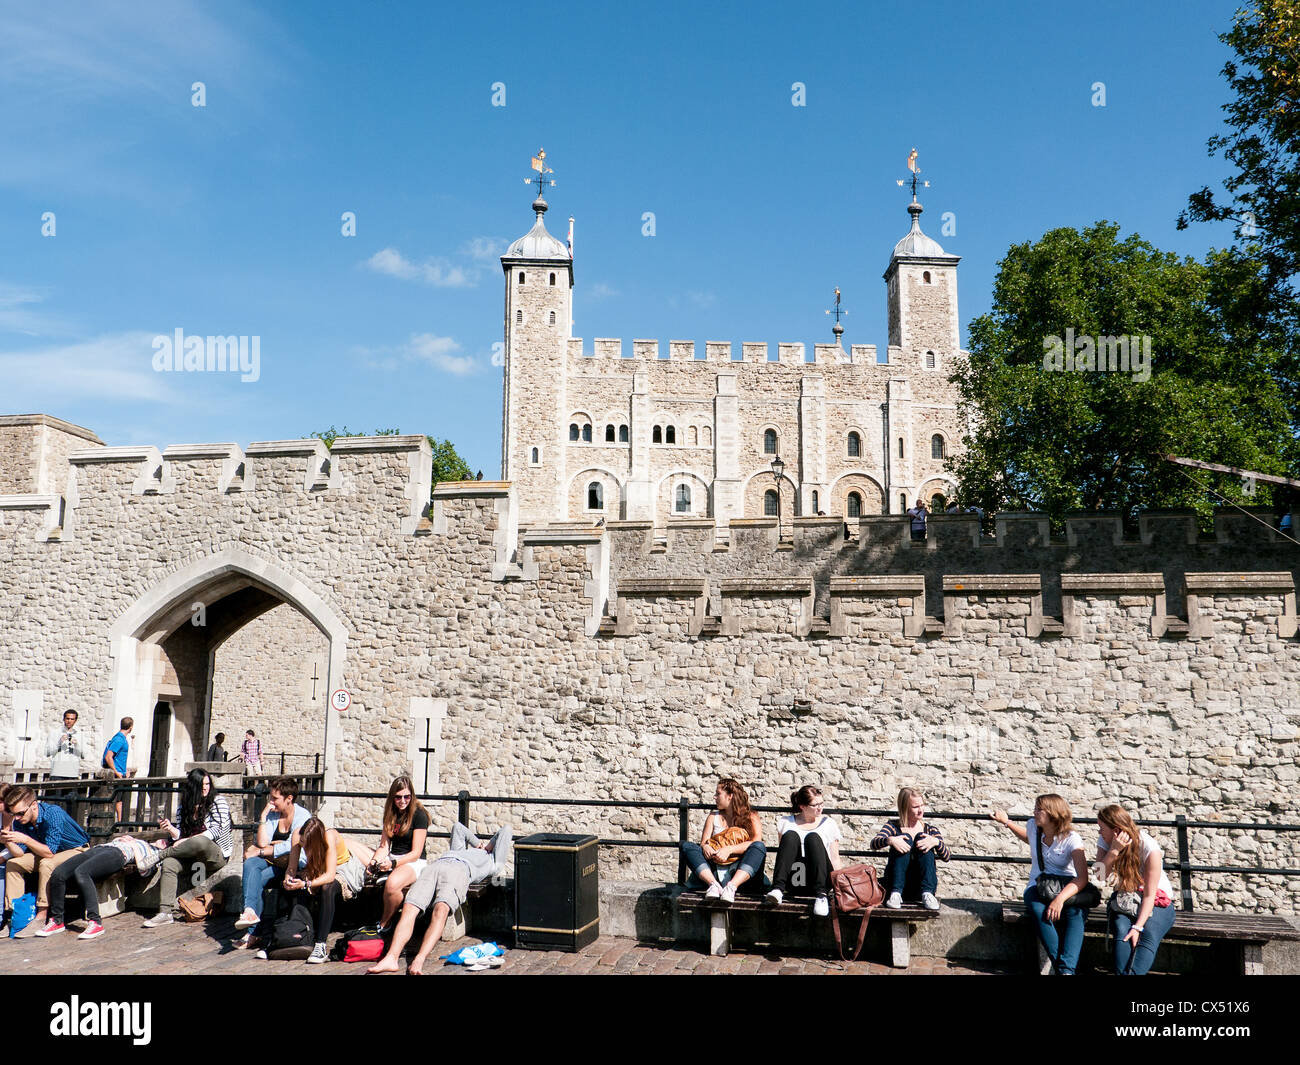 South tower and ramparts of the Tower of London, England Stock Photo